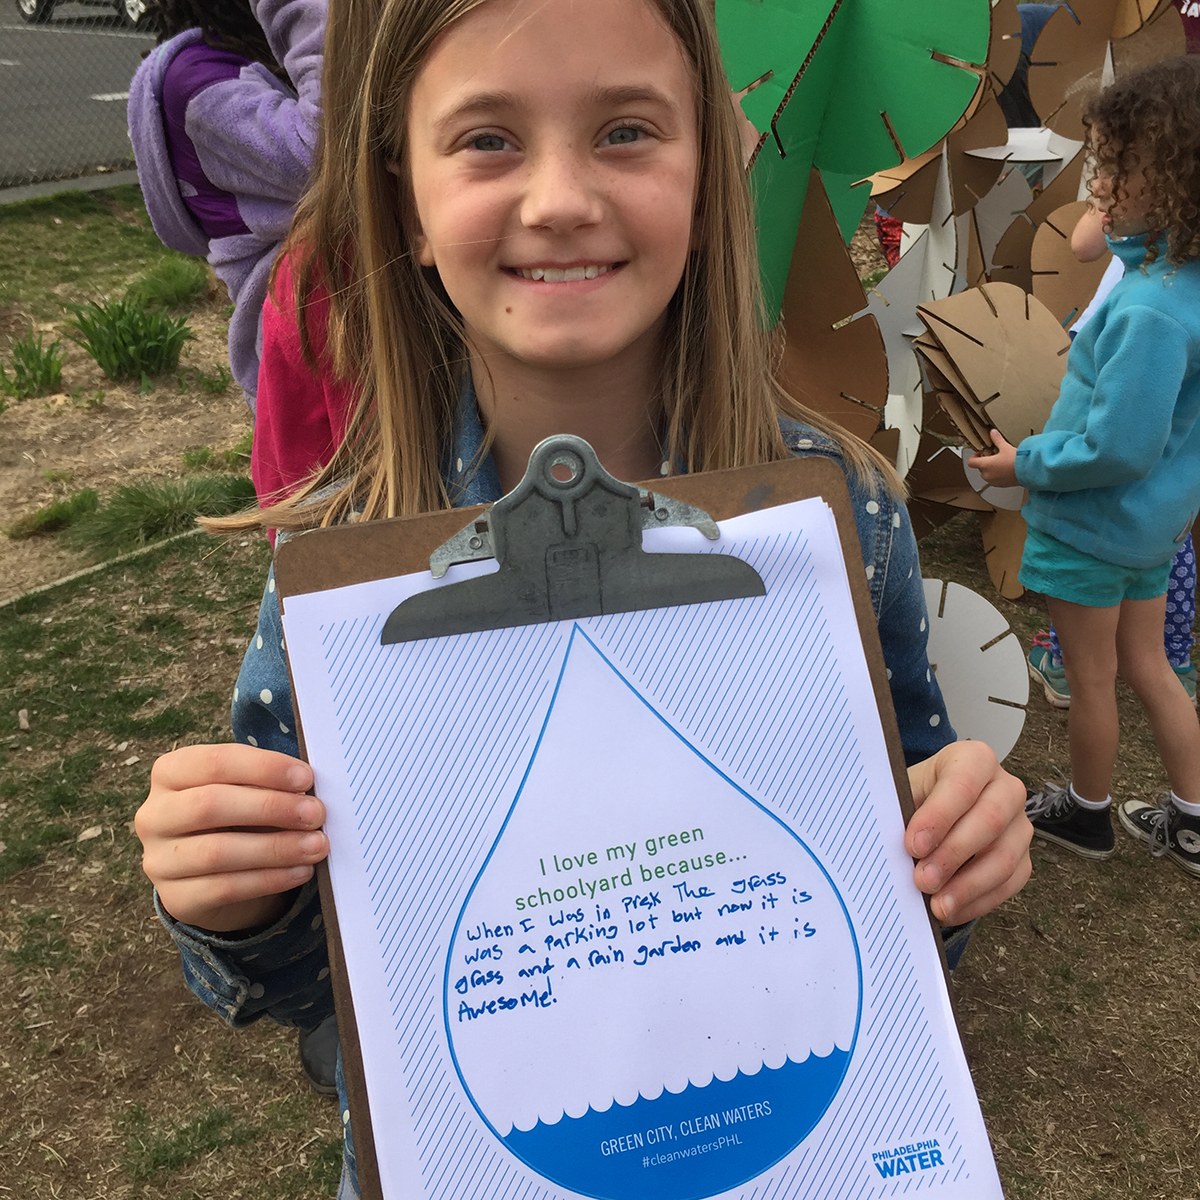 Students filled out cards that let them tell their Green City, Clean Waters story on Earth Day. You can take part and tell your story at Science Fest! Credit: Philadelphia Water